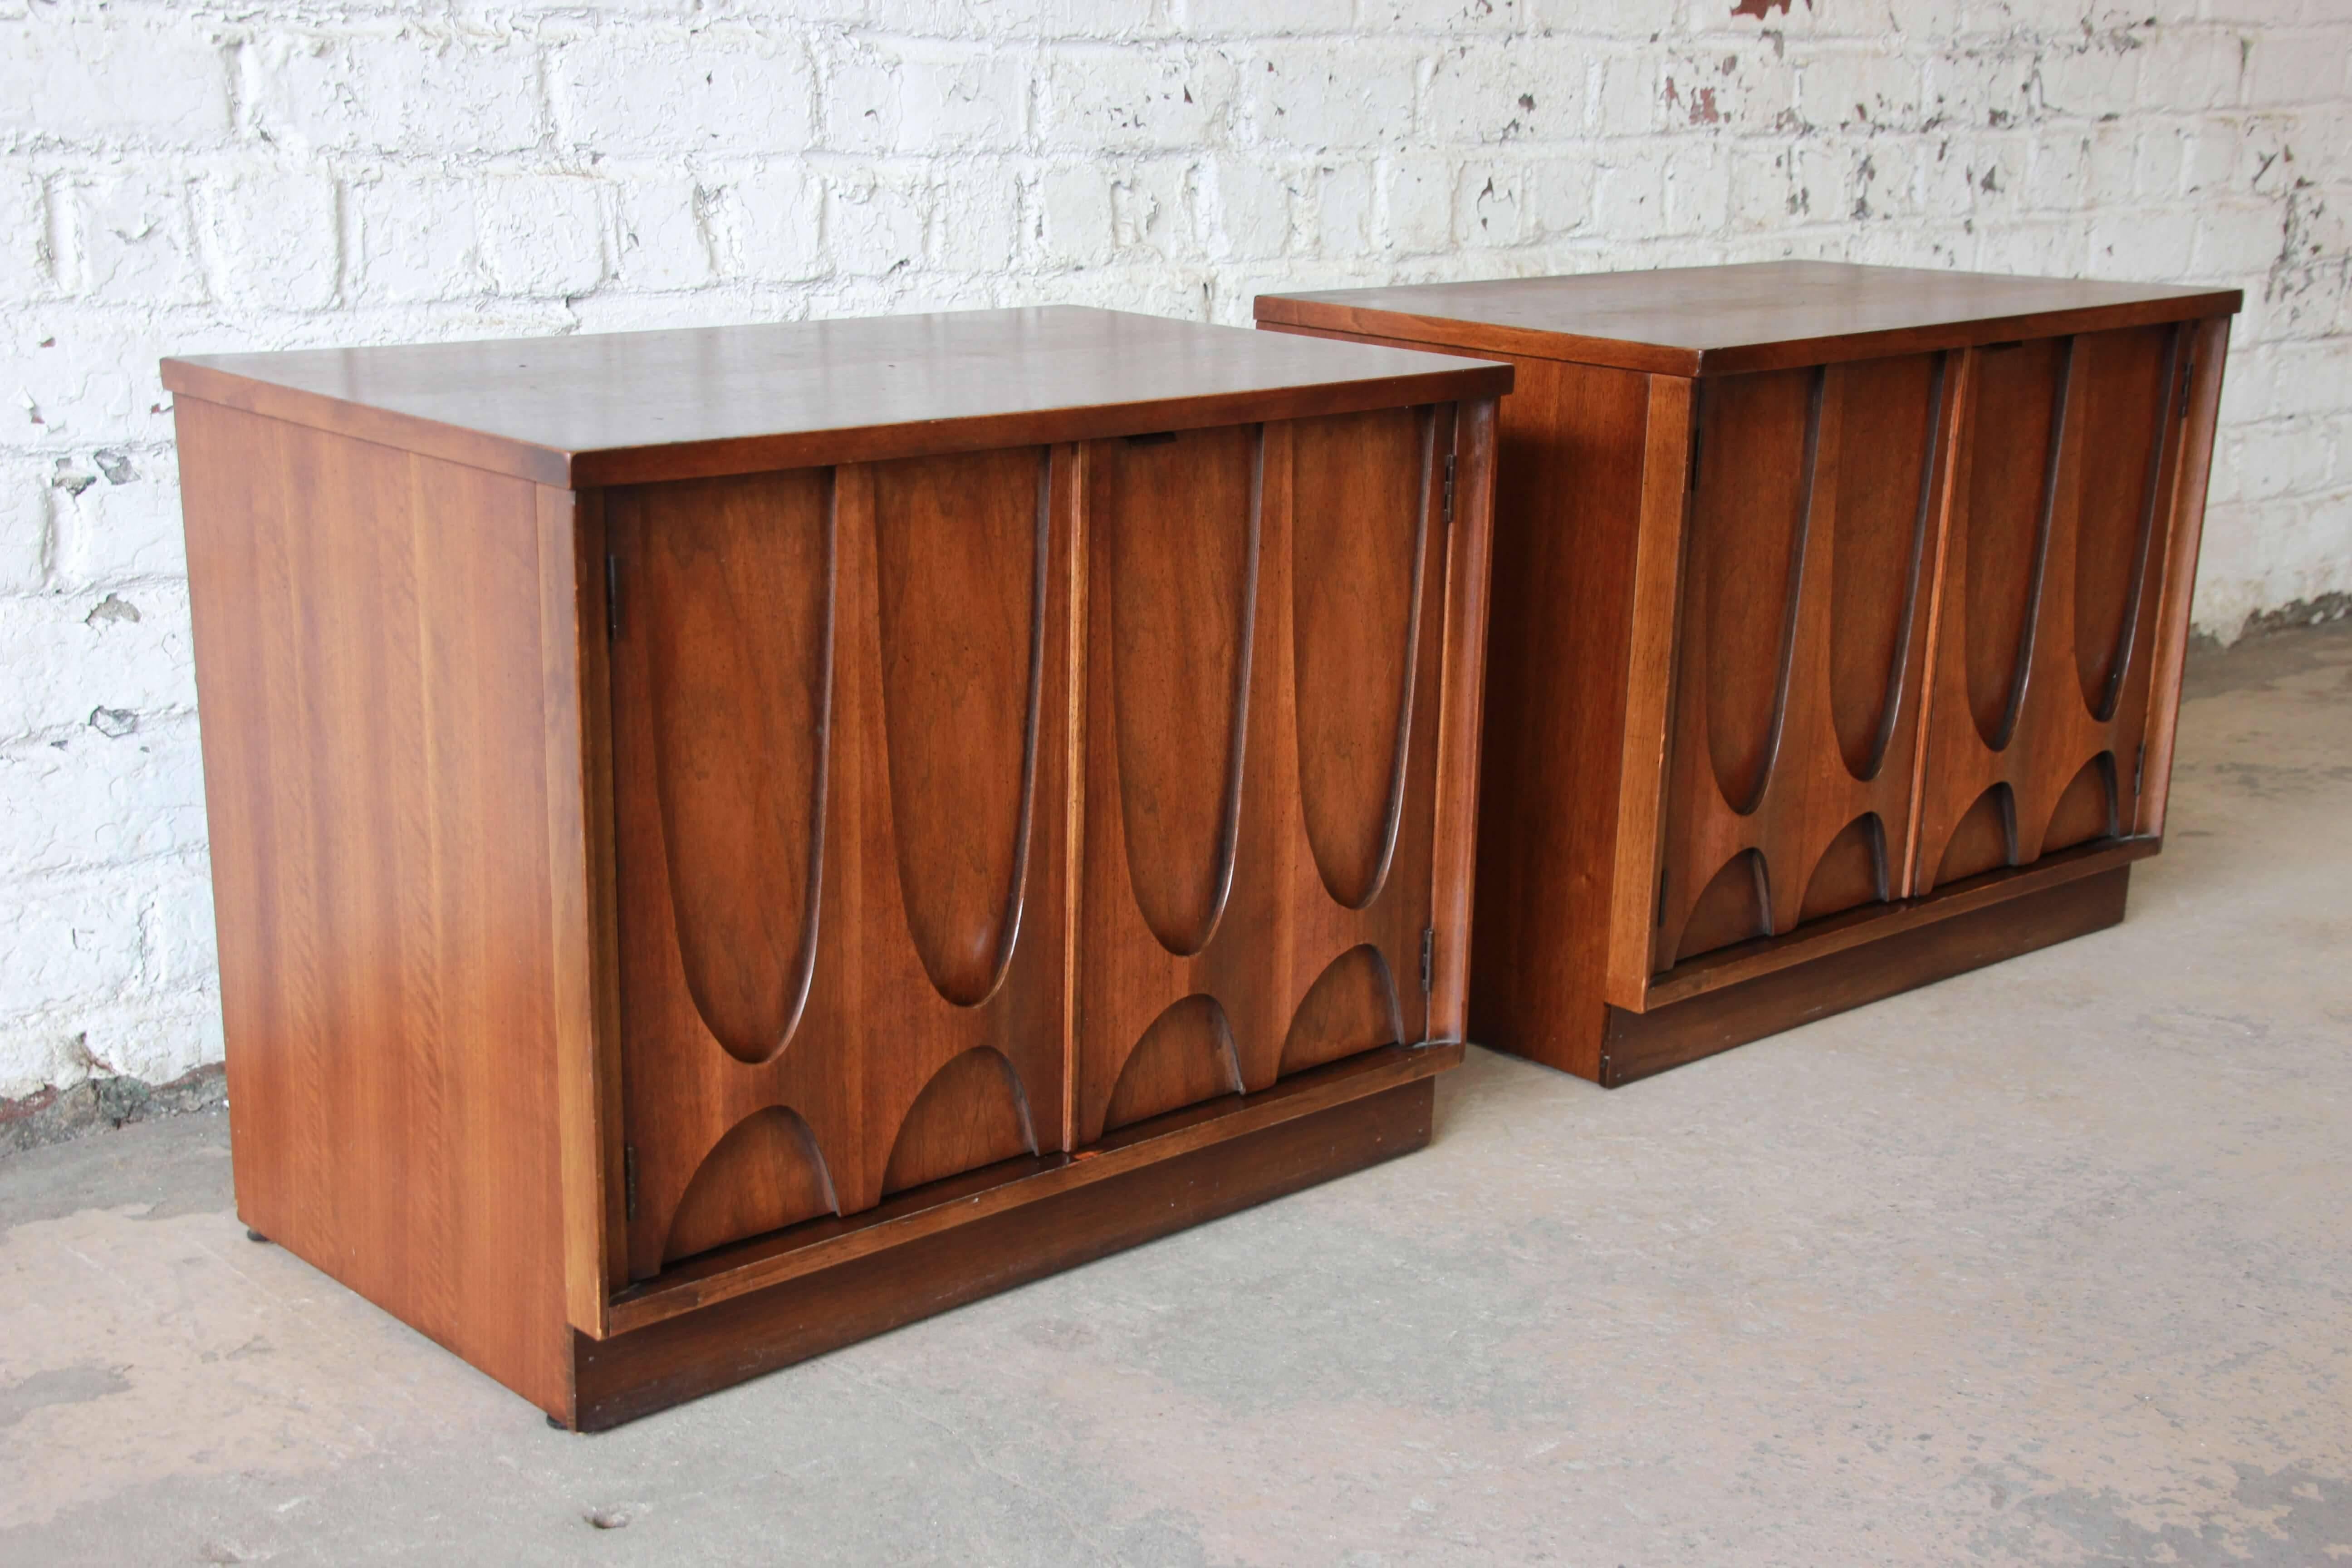 Offering a nice pair of Broyhill Brasilia nightstands. The nightstands have sculpted arch pulls that open up to a large cabinet space with ample storage. The line was designed by Oscar Niemeyer. The cabinets are in good vintage condition.